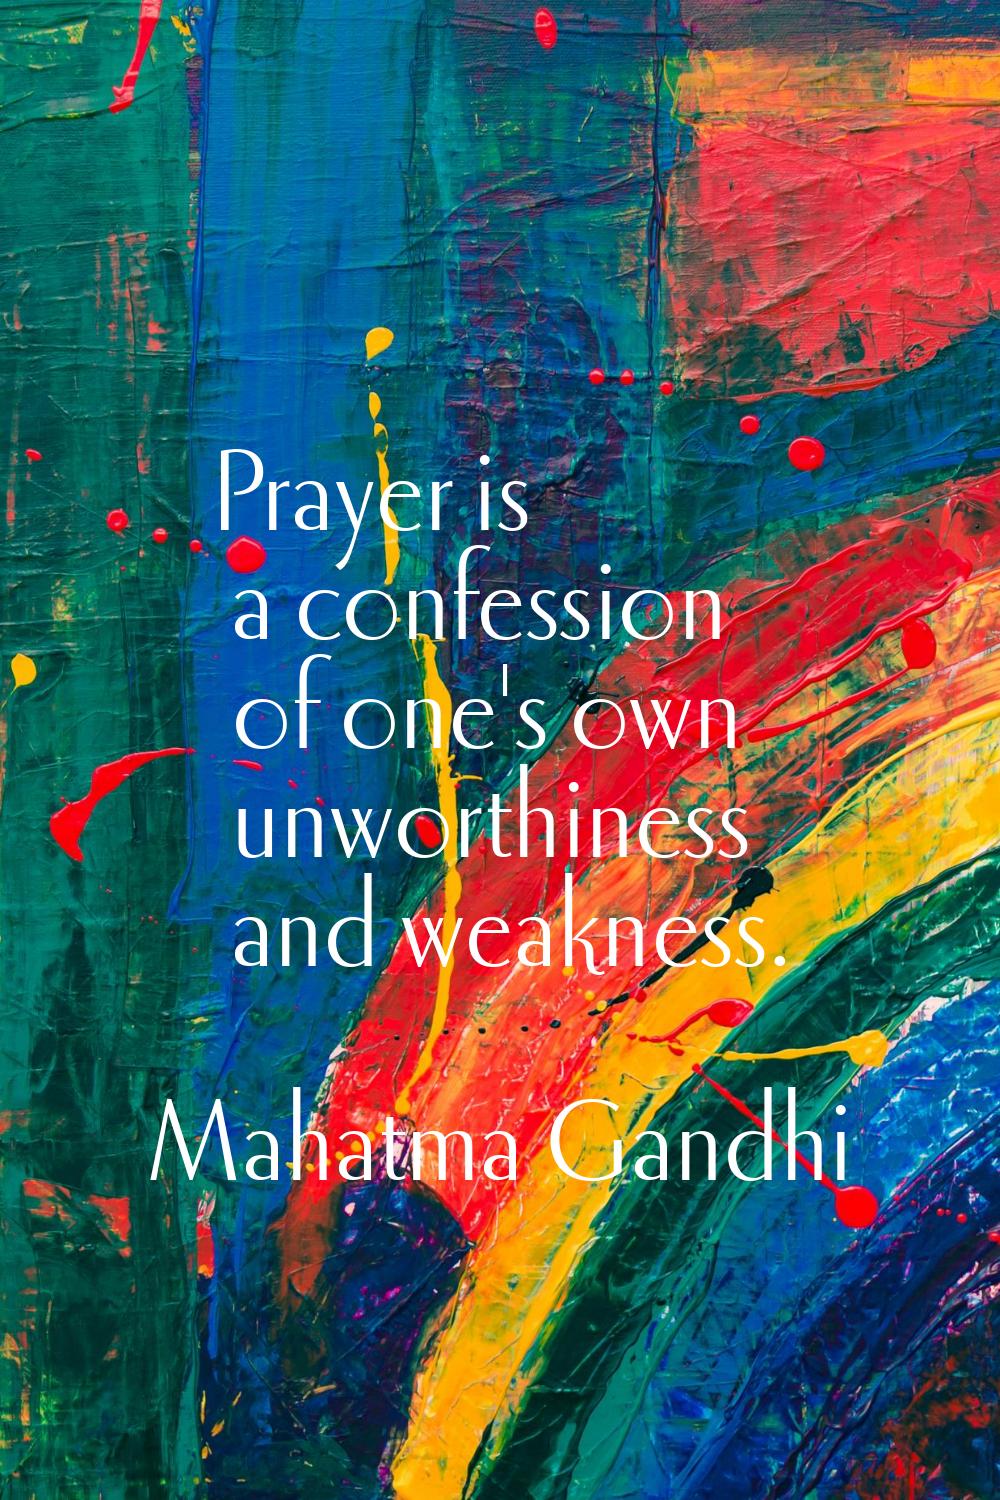 Prayer is a confession of one's own unworthiness and weakness.